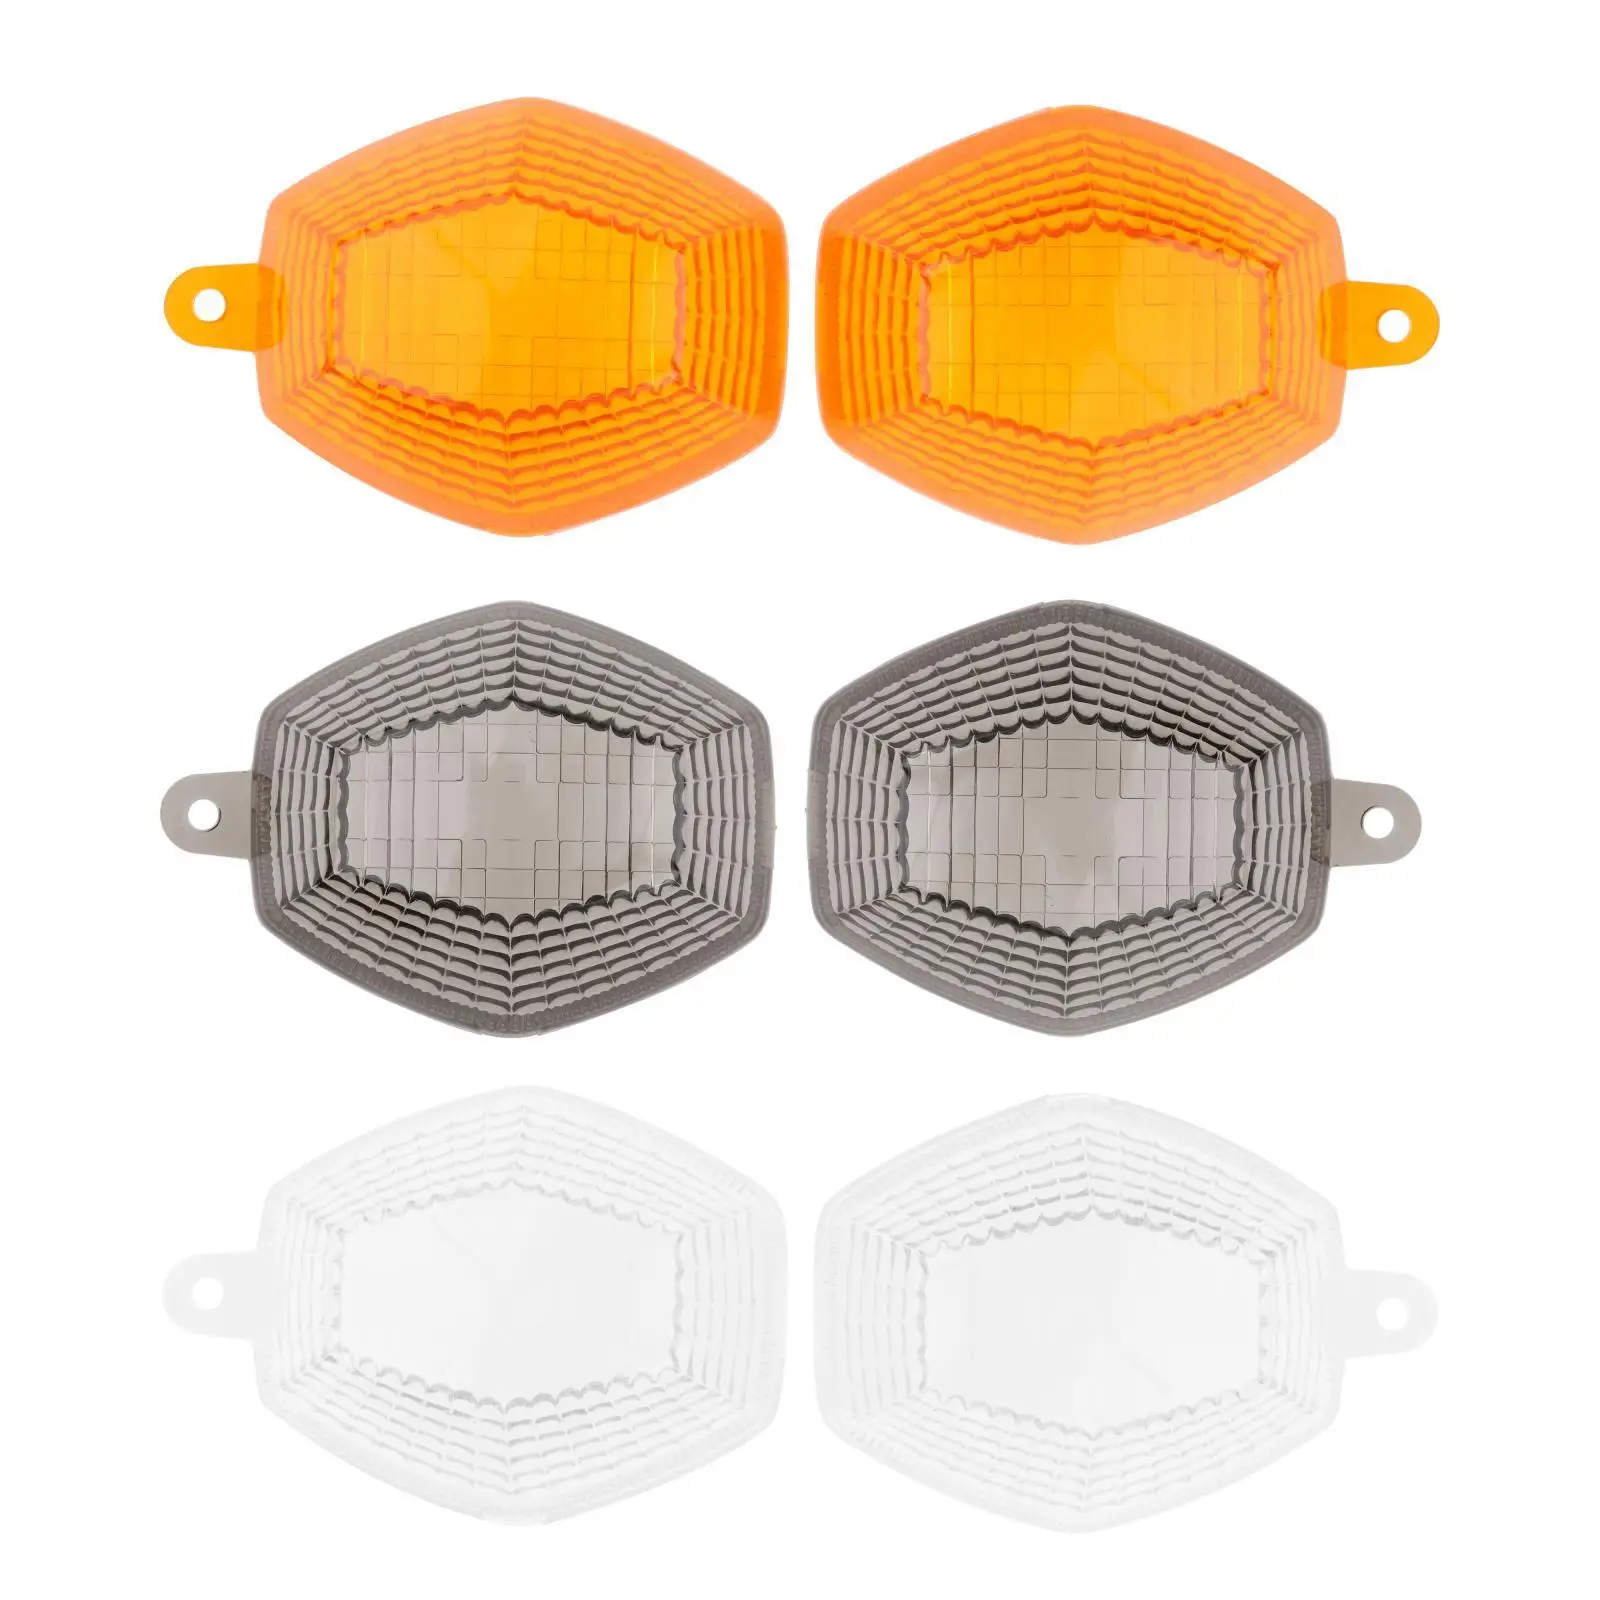  , Motorcycle Parts, Motorcycle Accessories, Indicator Lamp Cover, Fit for  Gsf 650 N/5-2010